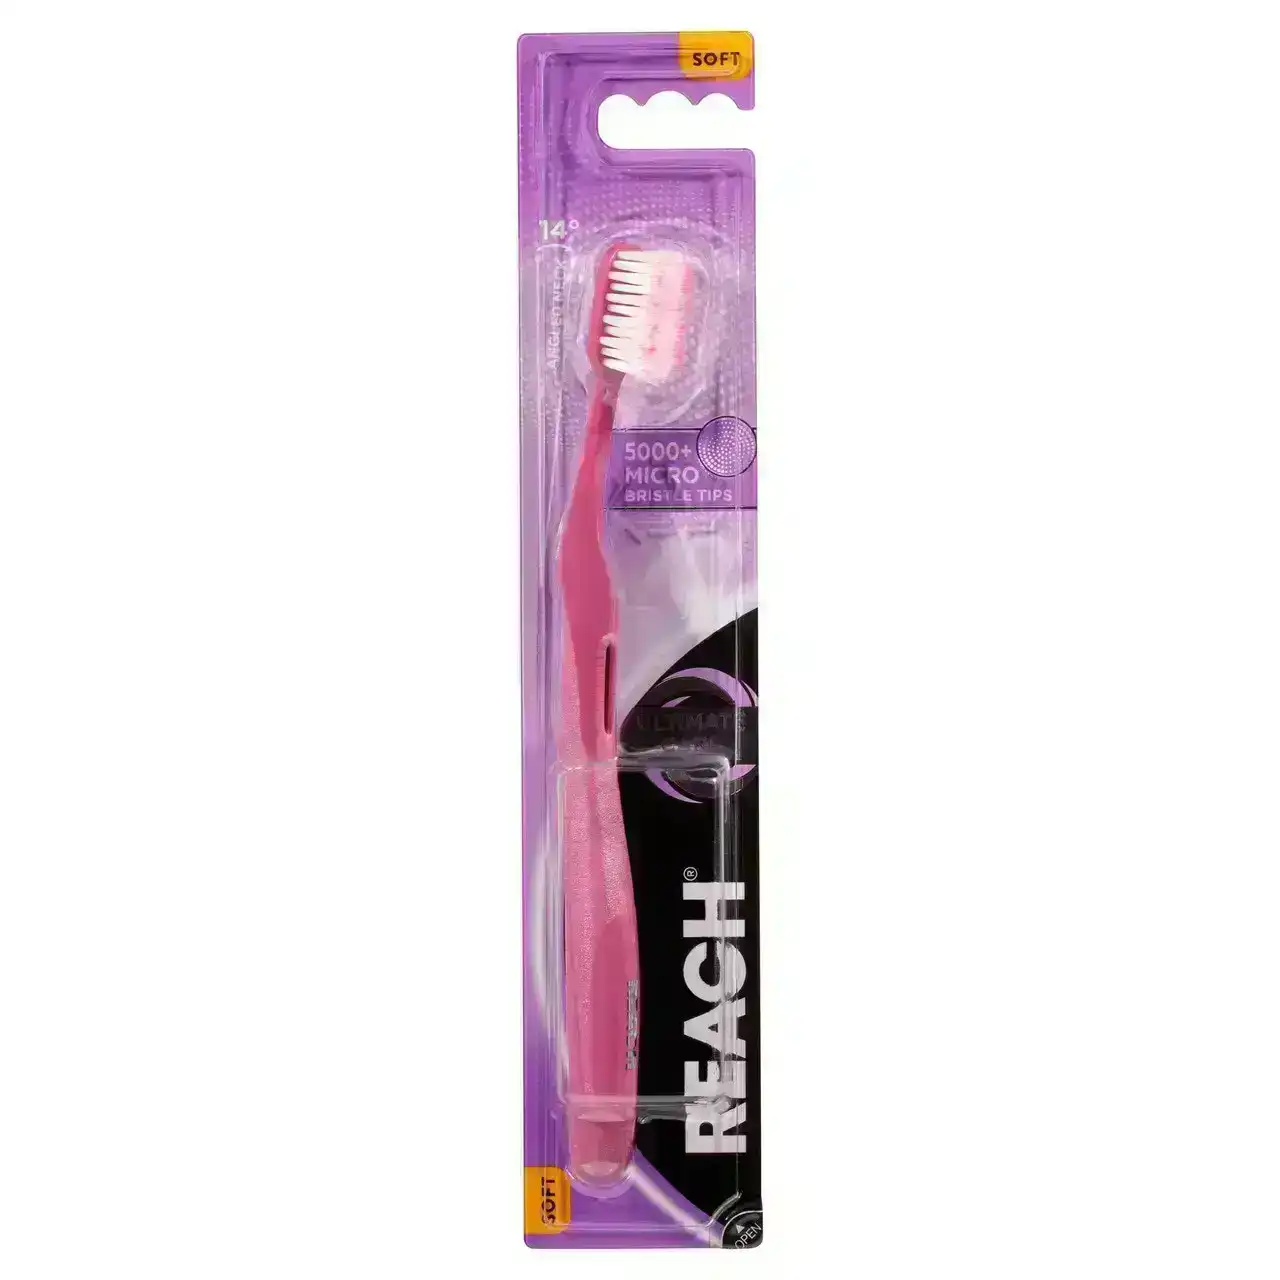 Reach(R) Ultimate Care Toothbrush Soft 1pk